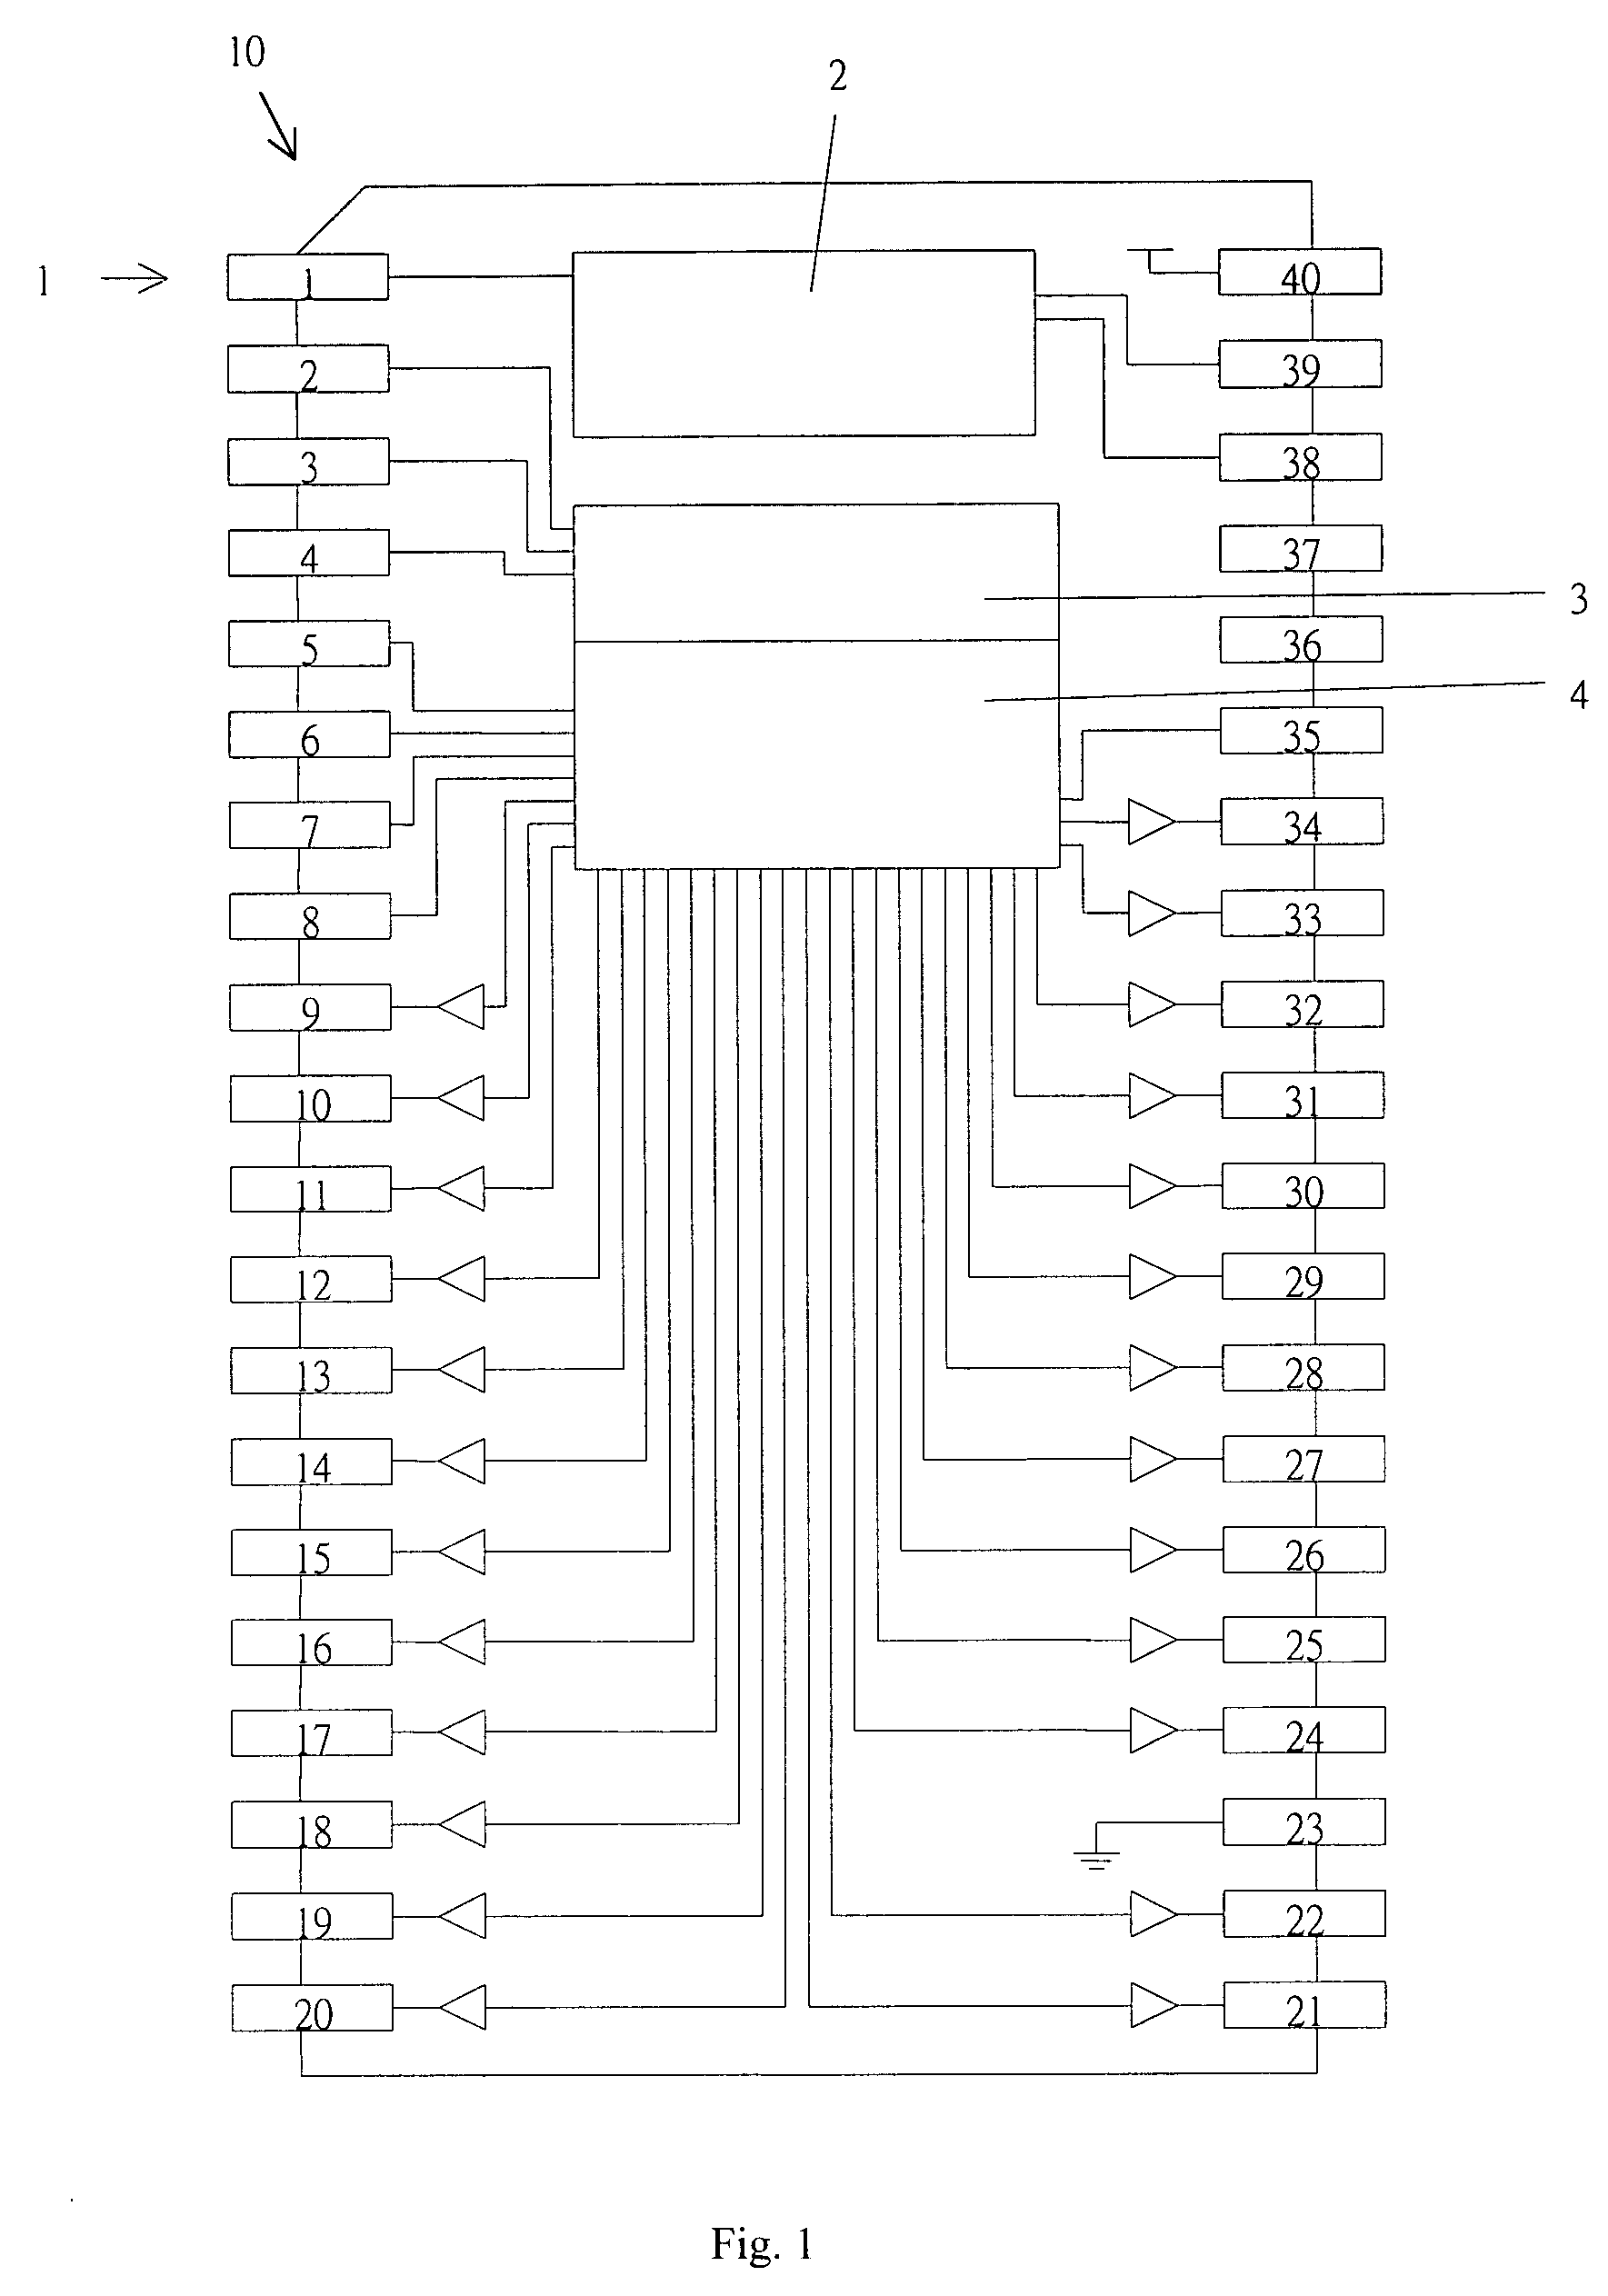 Integrated circuit driver chip for an electroluminescent device